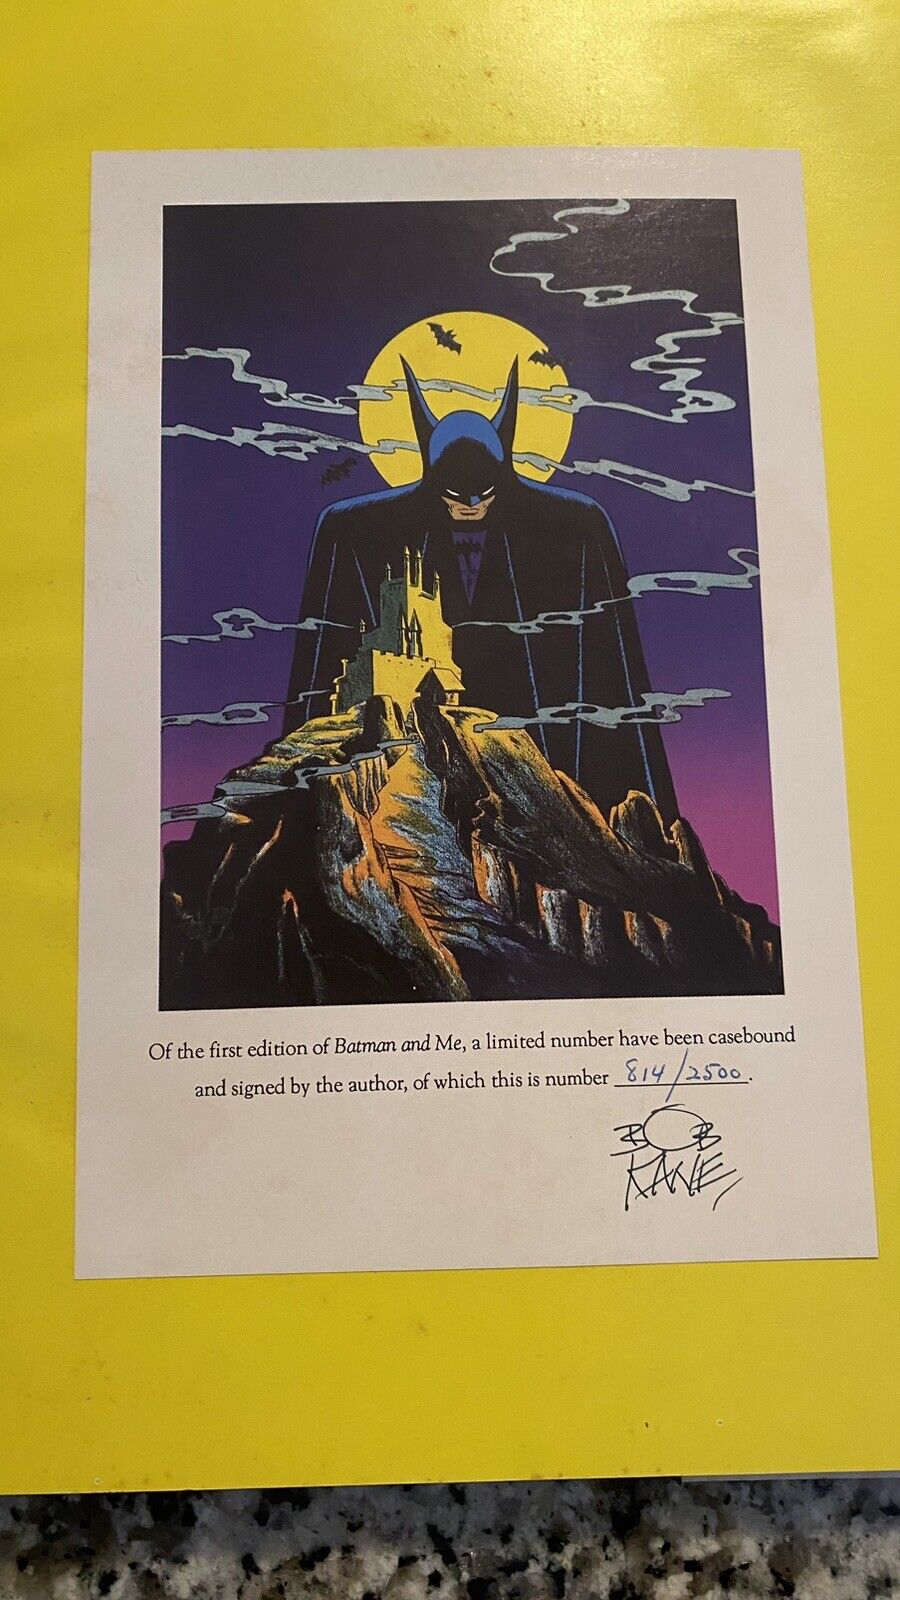 Batman & Me (1989) by Bob Kane and Tom Andrae Book Signed Numbered 814/2500